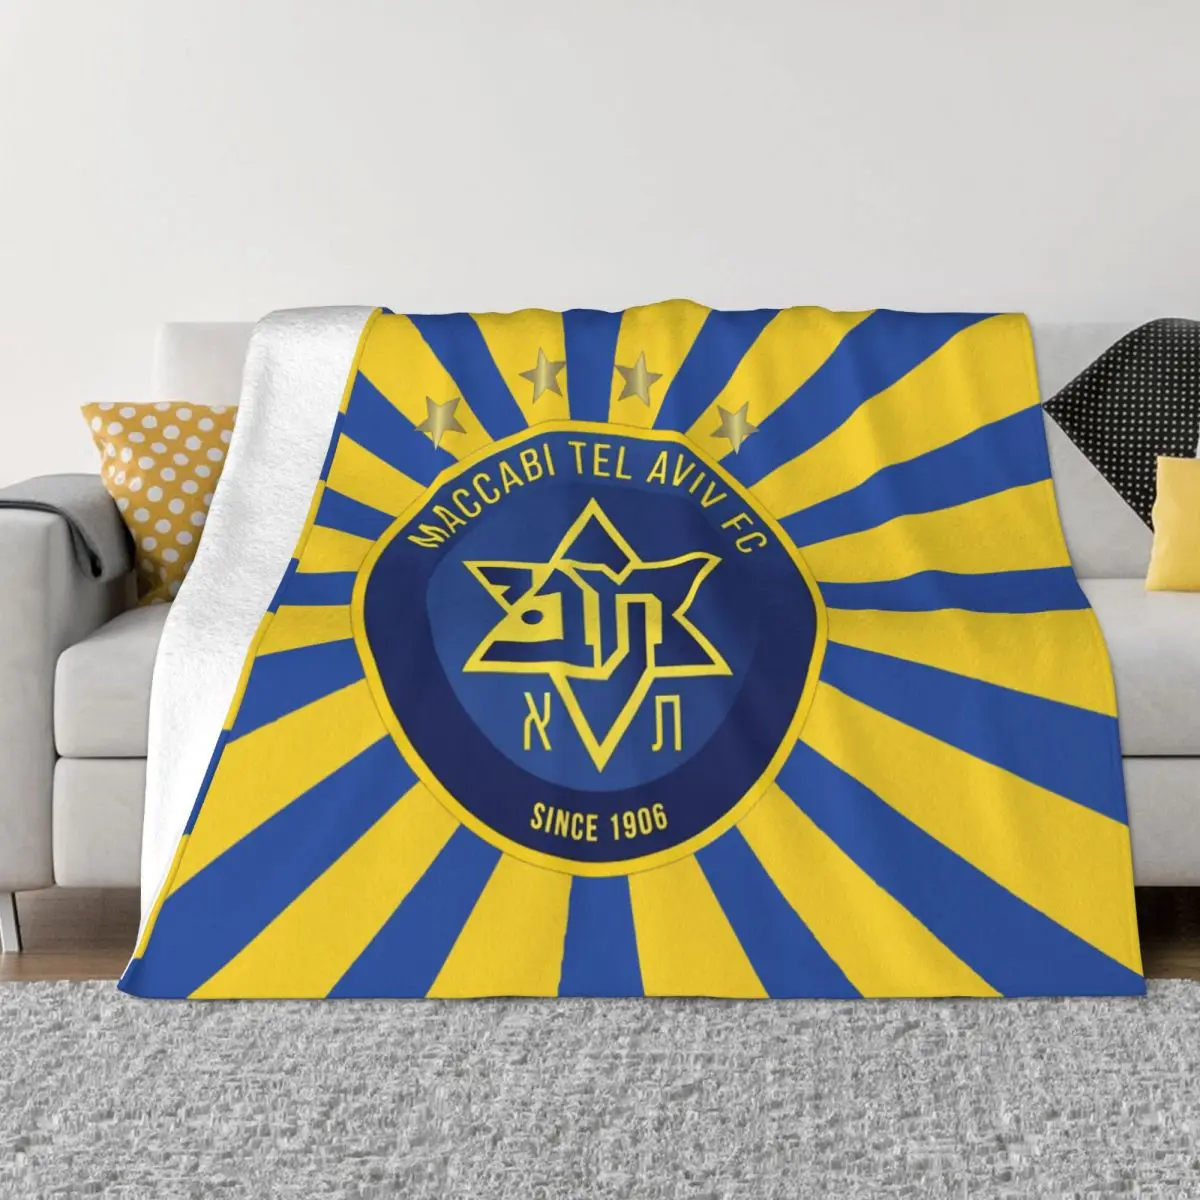 

Maccabi Tel Aviv Fc Flannel Throw Blanket Cover Blanket Super soft Polyester Warm durable high-quality one-sided blankets